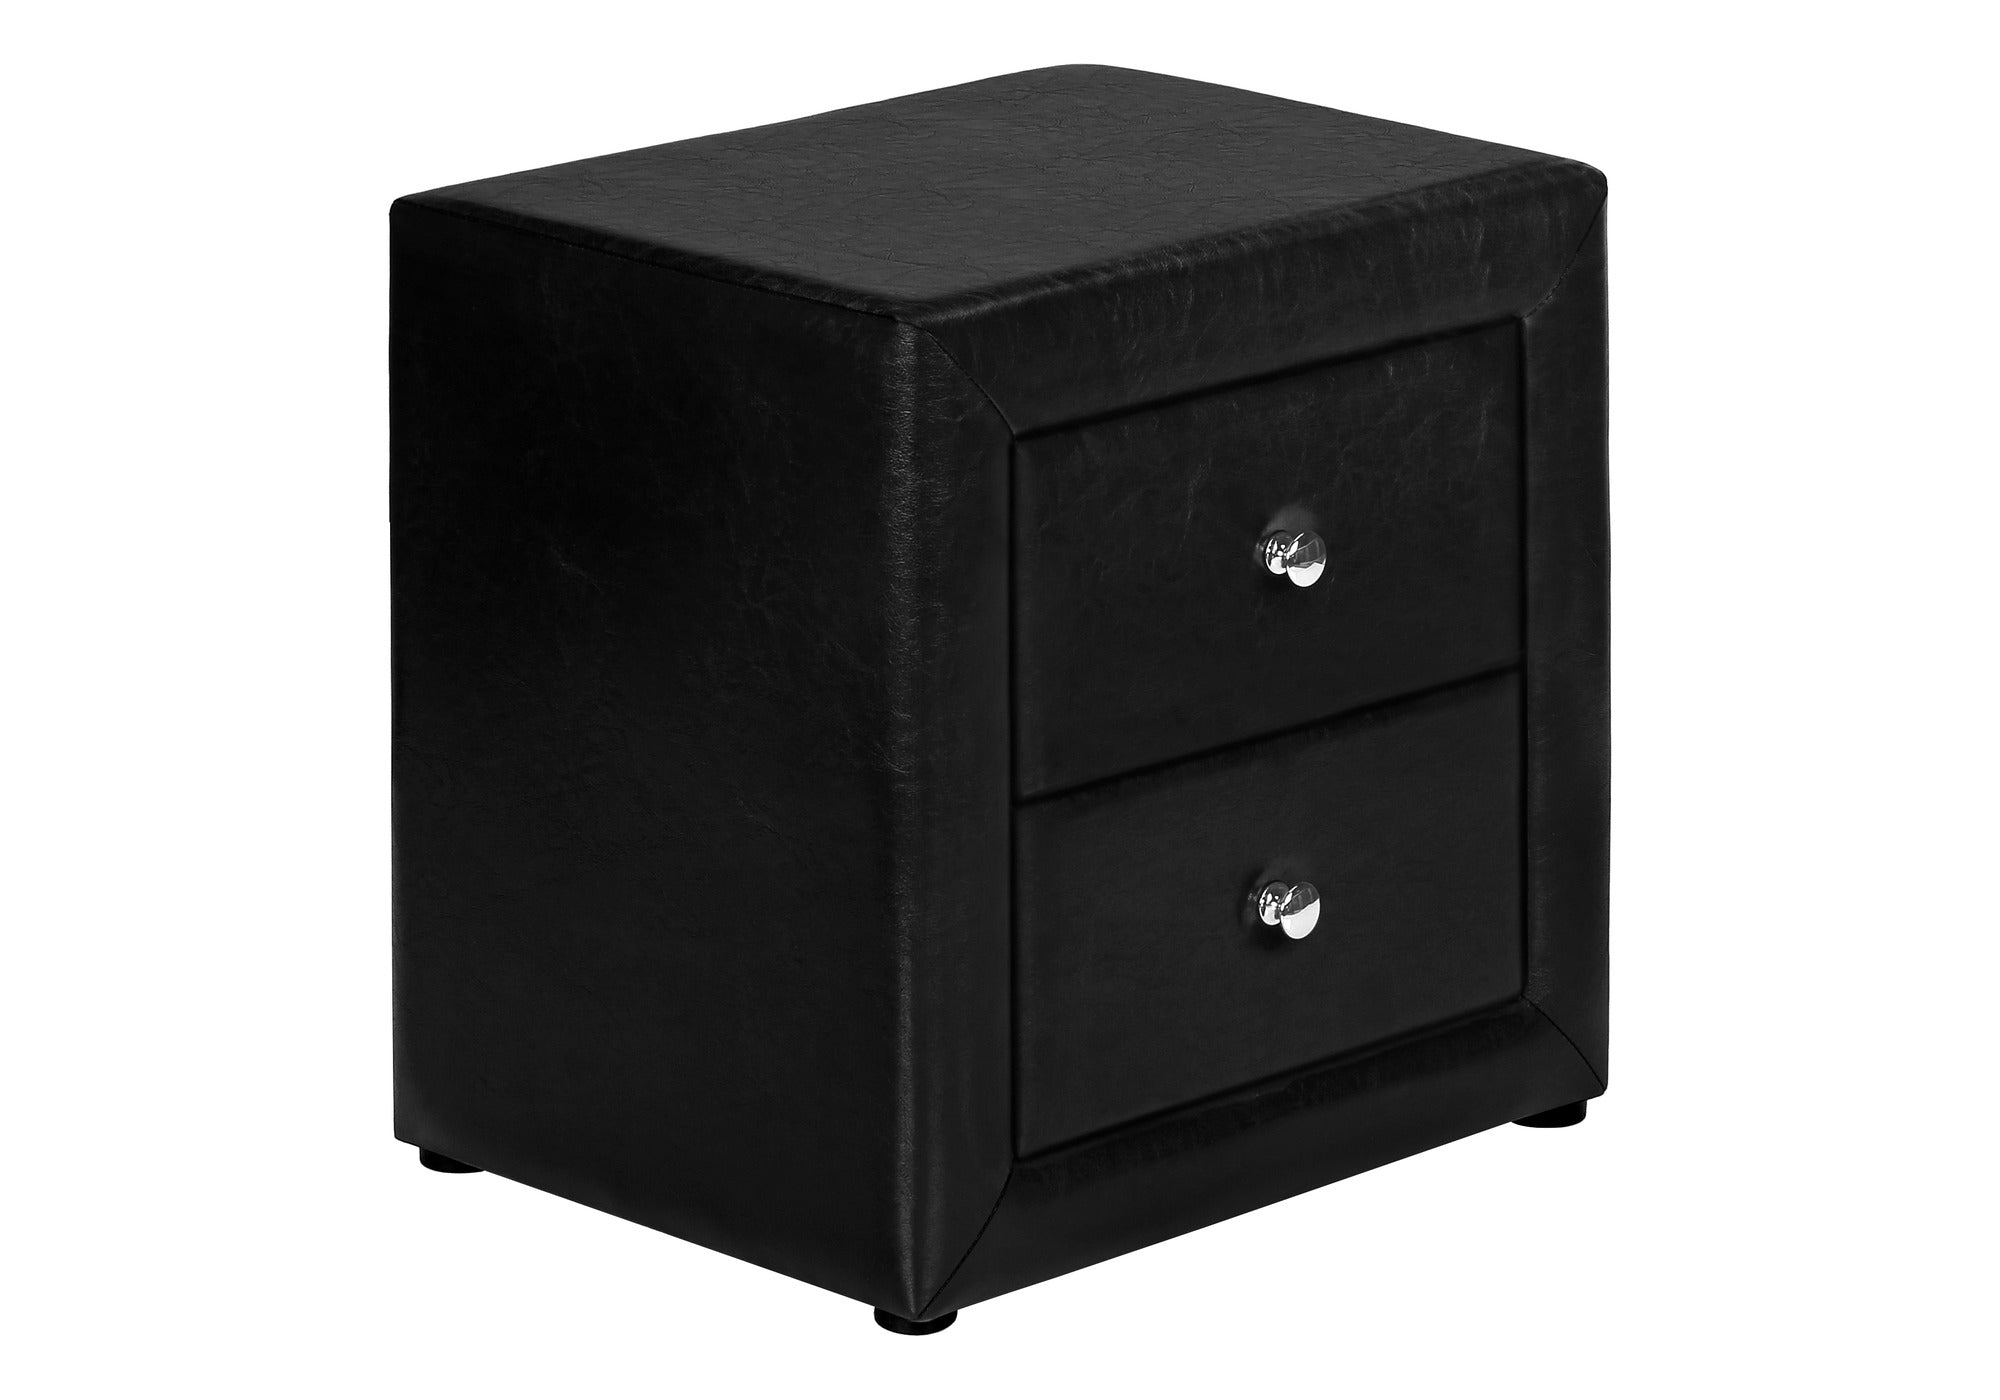 NIGHTSTAND - 21"H / BROWN LEATHER-LOOK